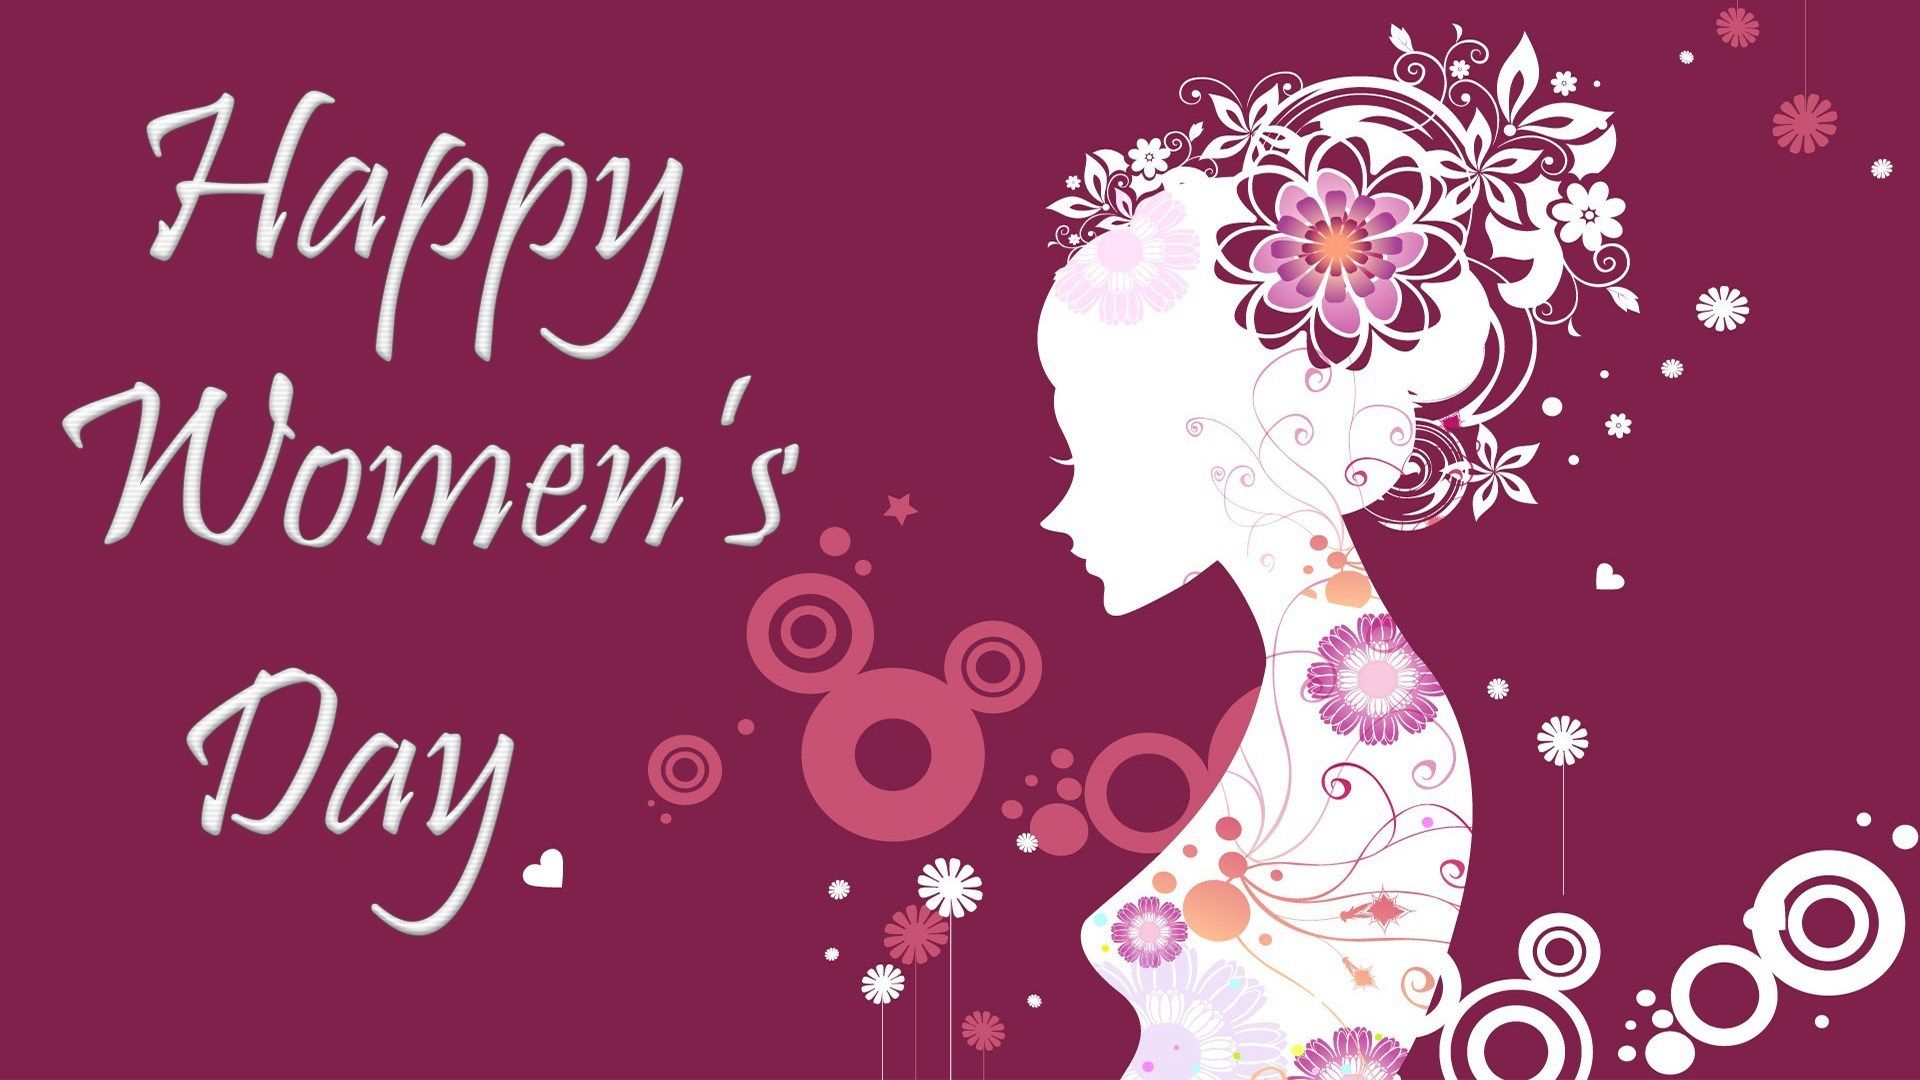 International Women's Day 2019: Wishes, Quotes, Messages, SMS